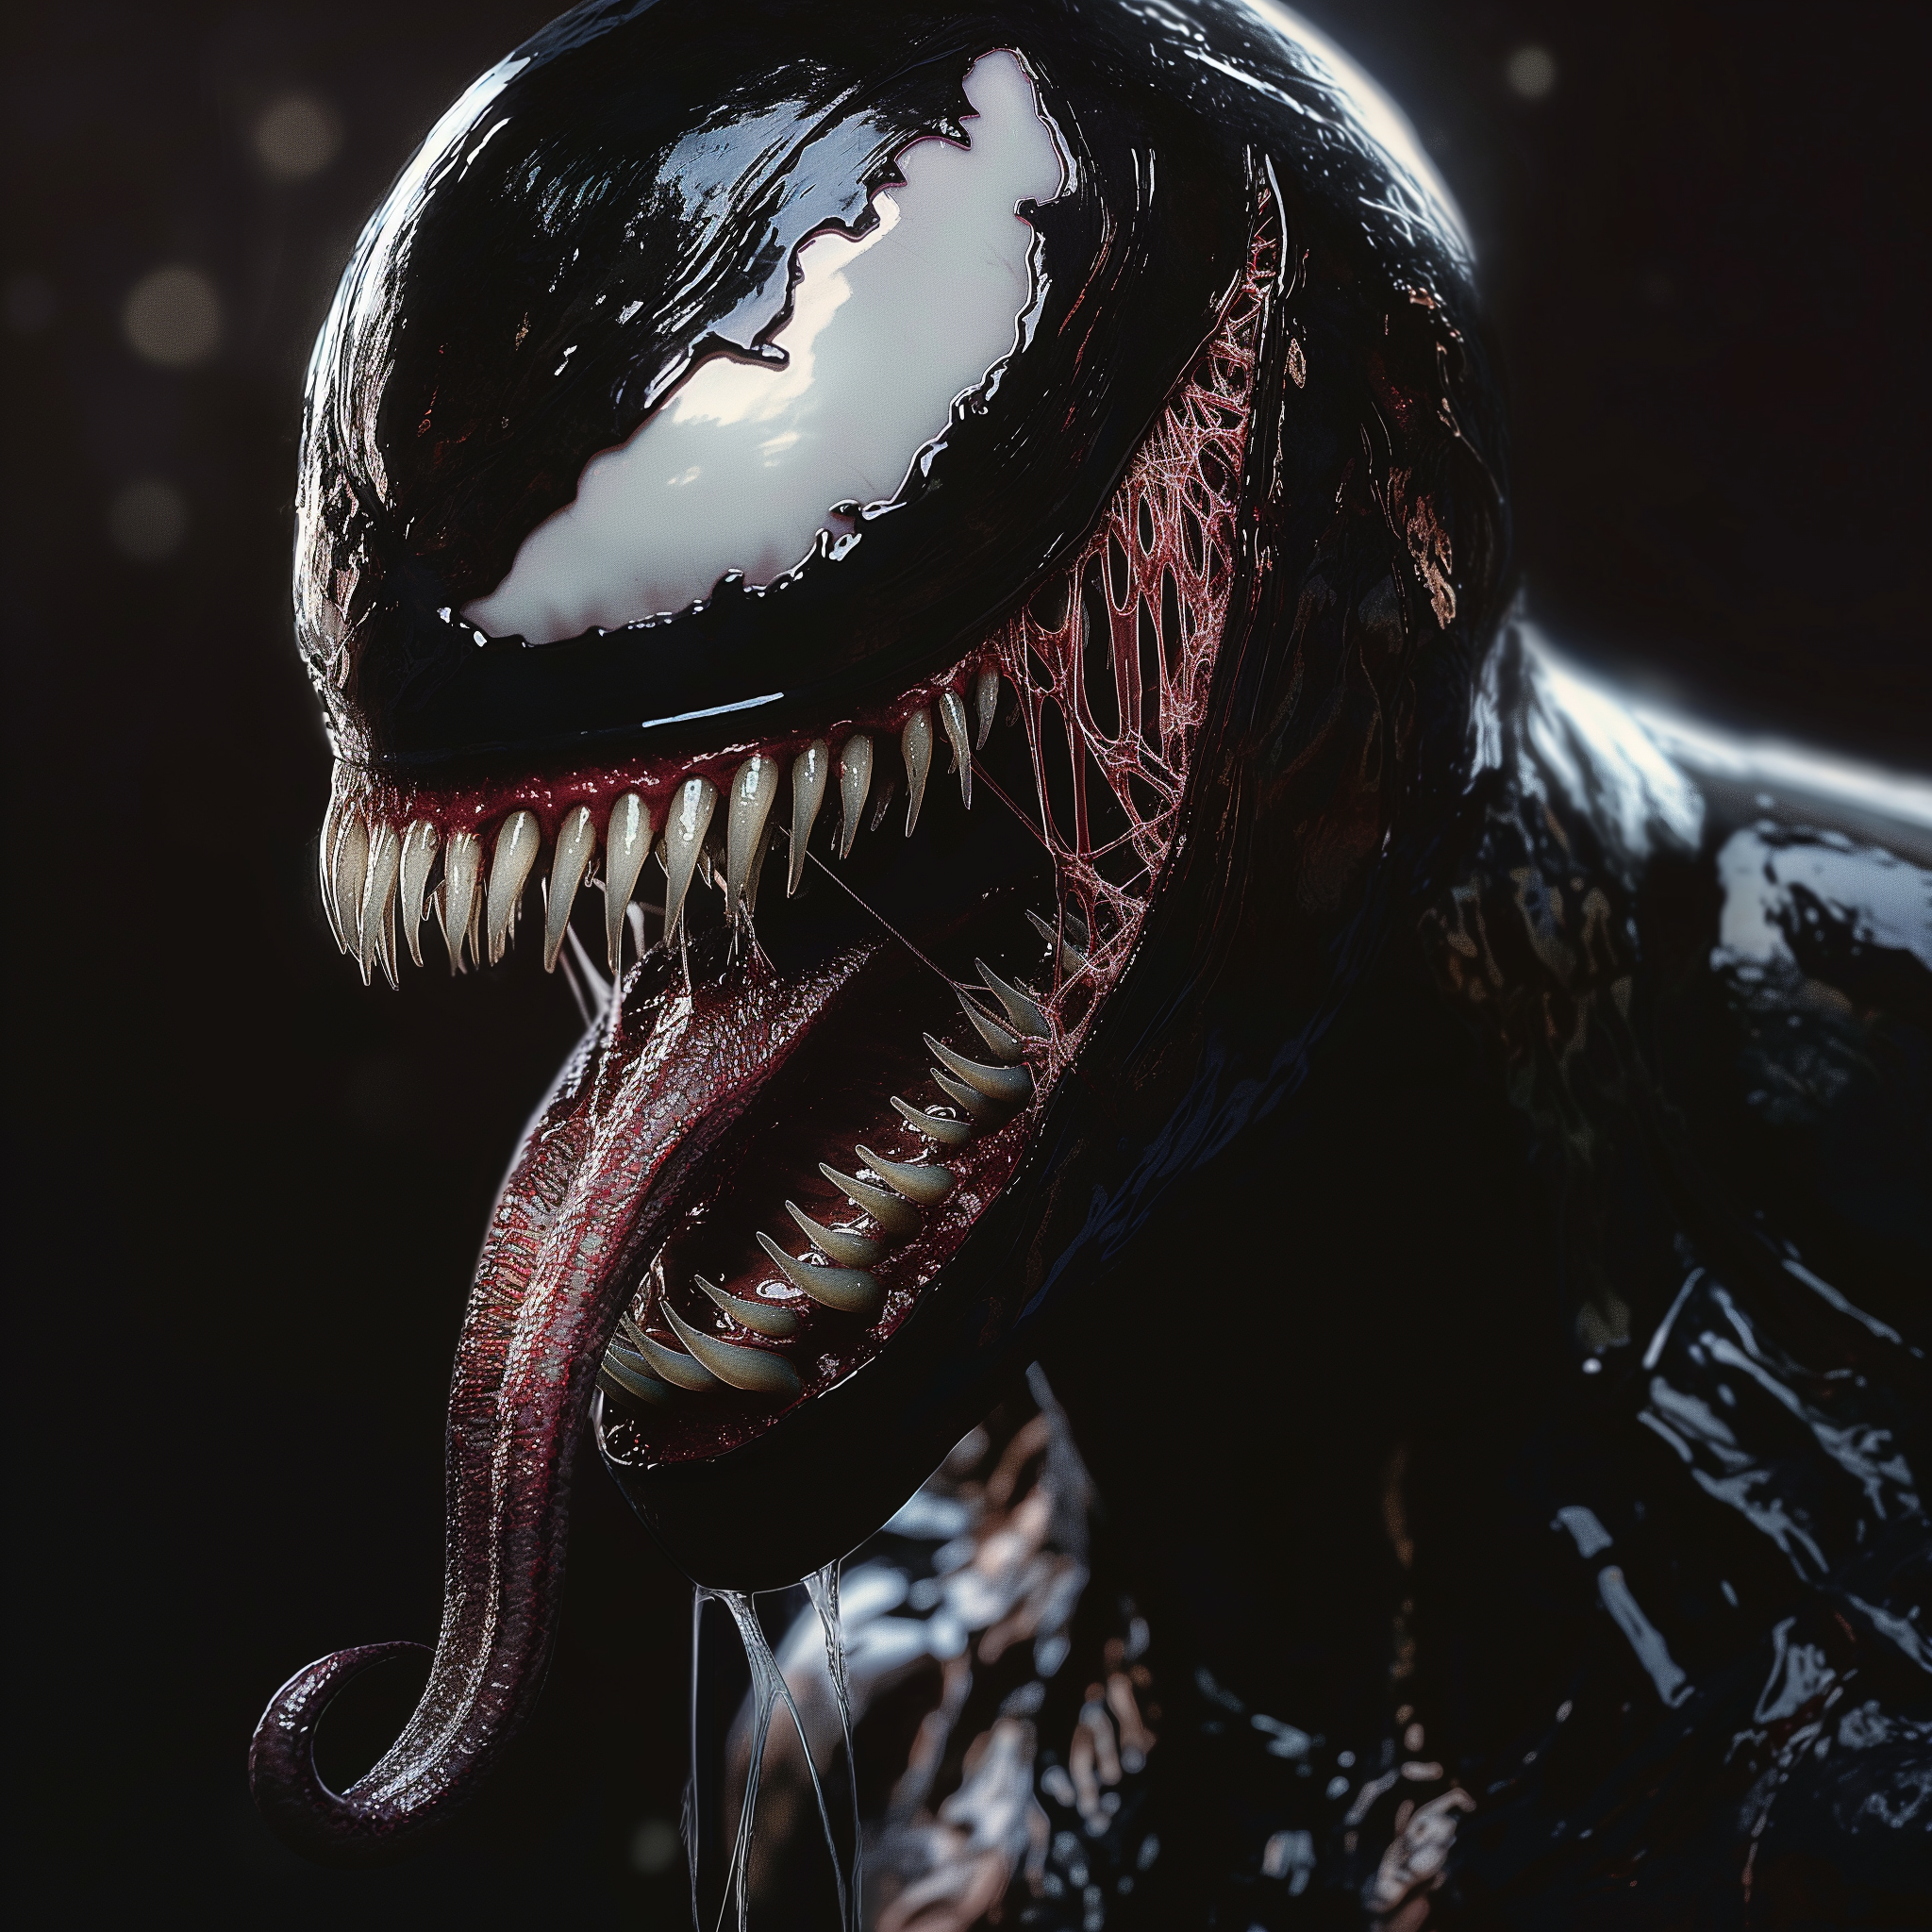 Profile image of Venom, the iconic antihero from Marvel Comics, featuring his menacing grin and extended tongue.